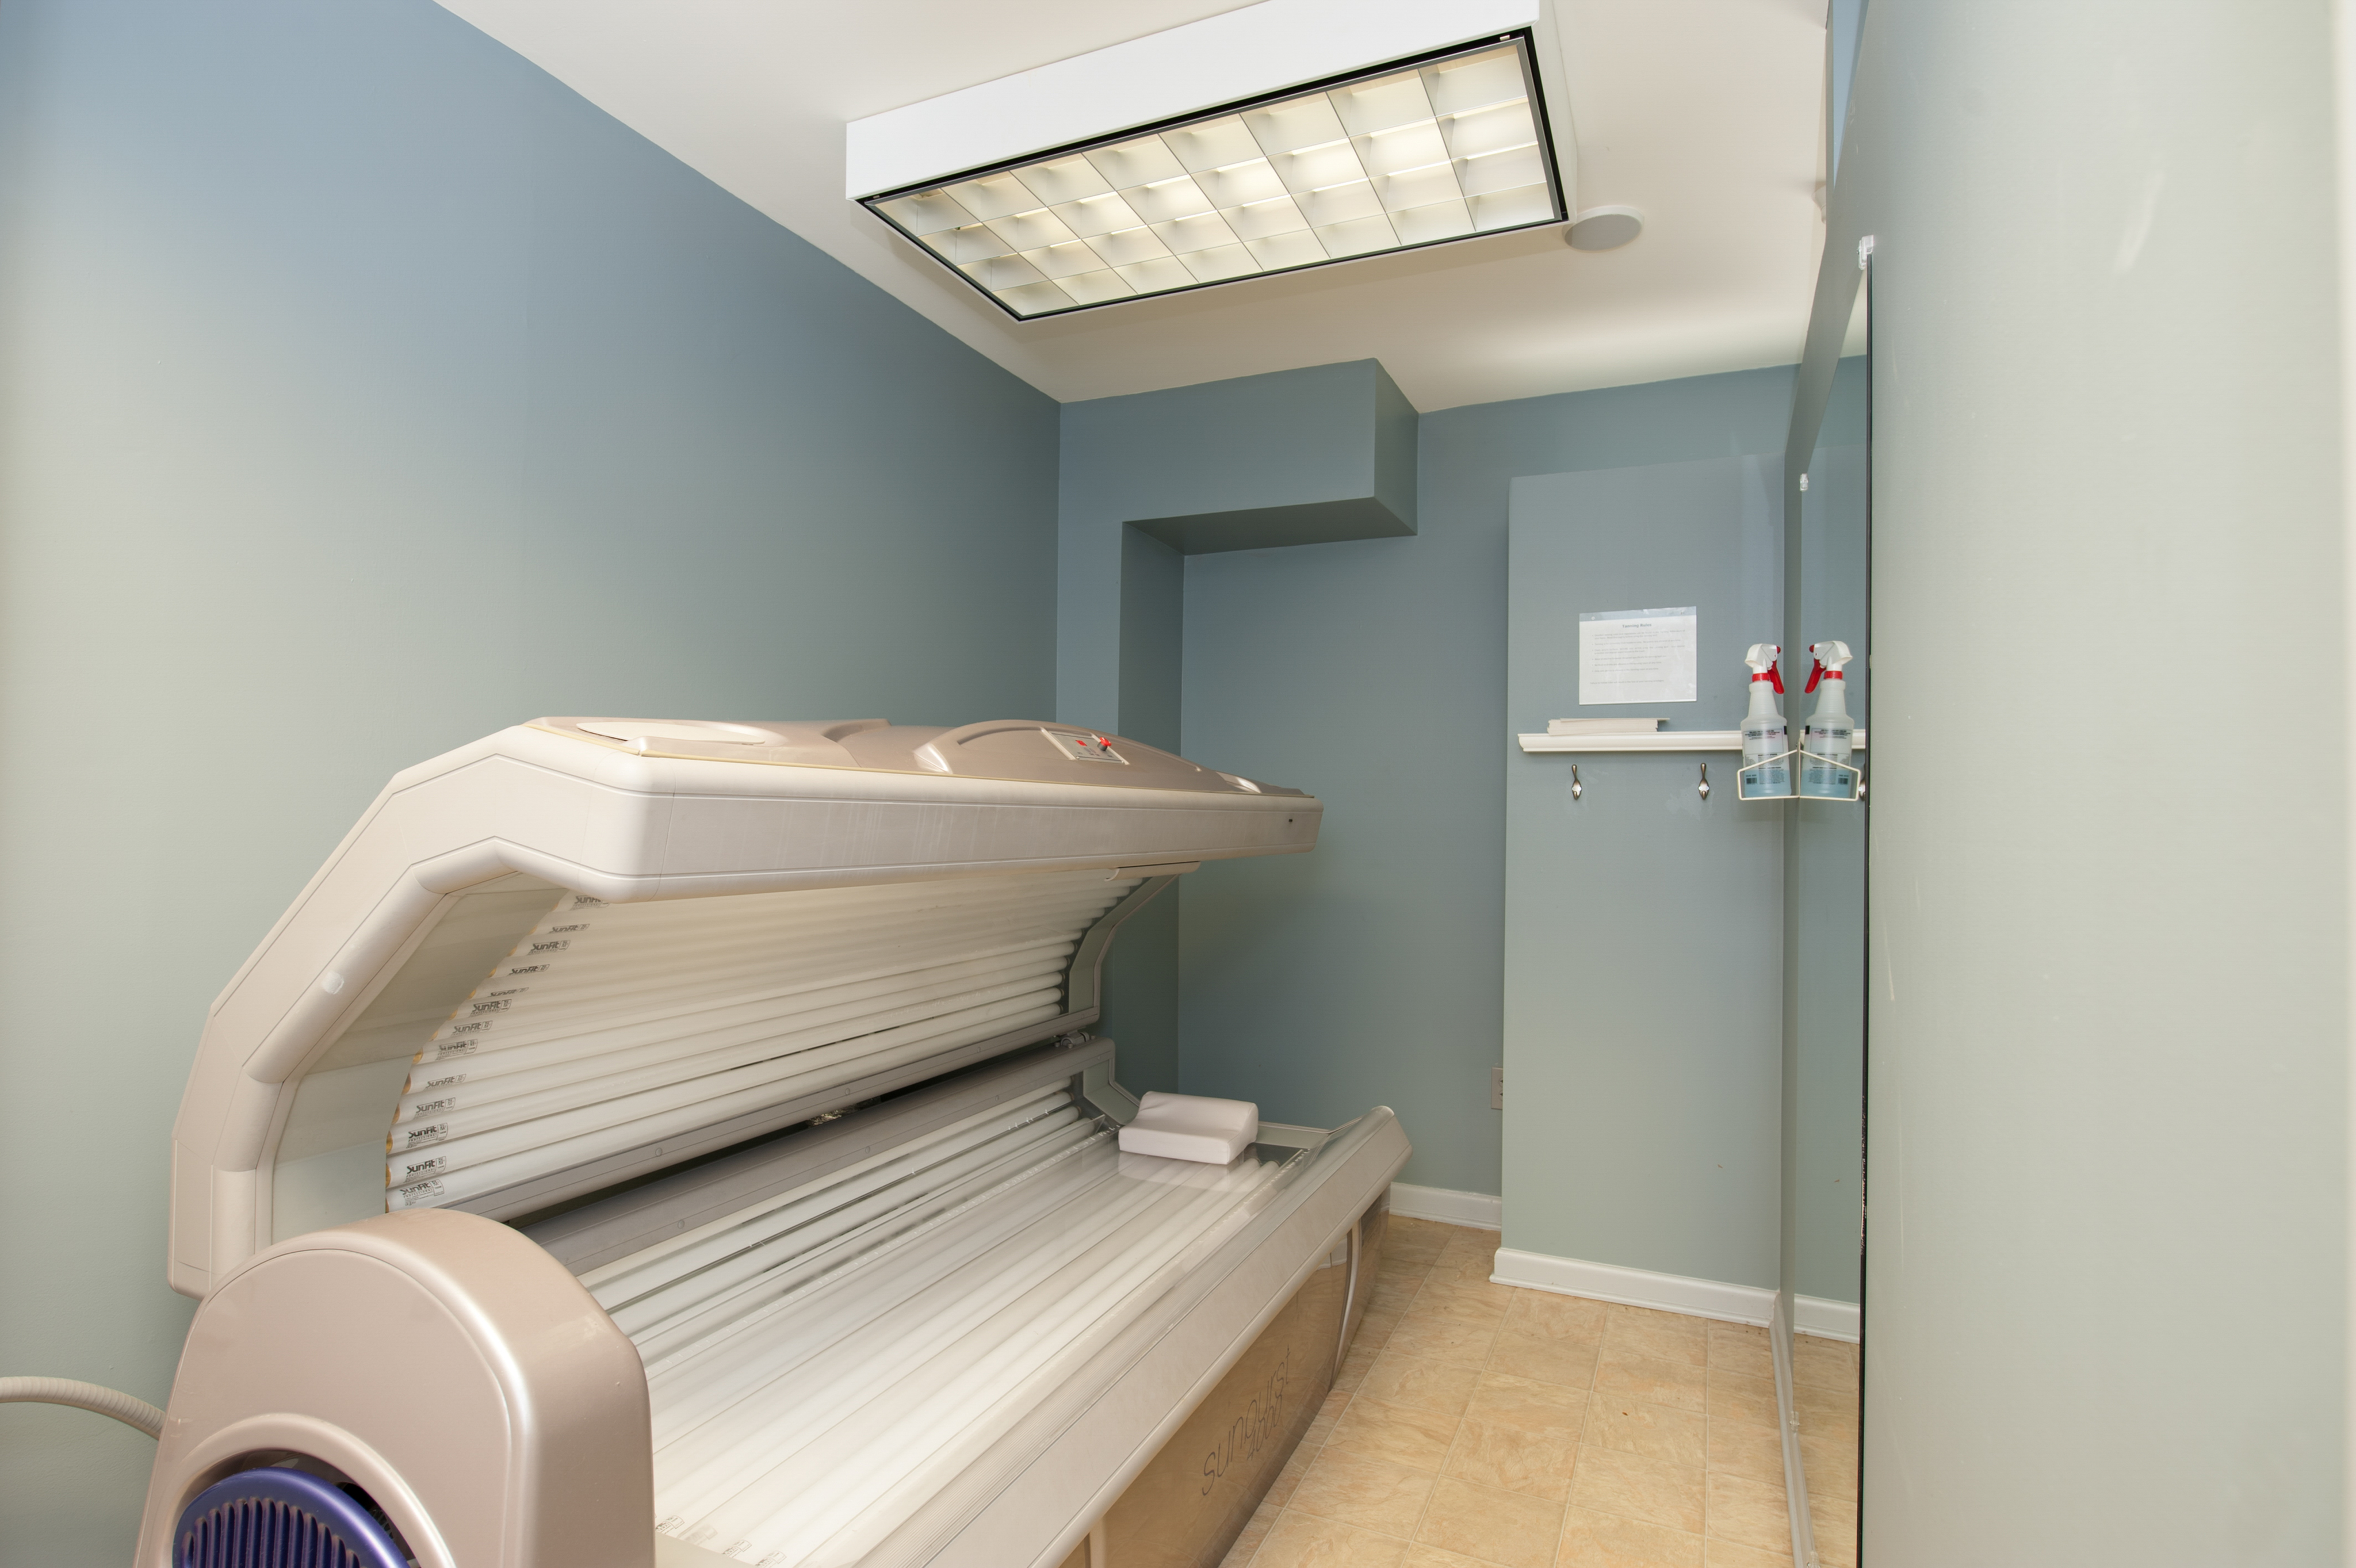 University Club Apartments Lifestyle - Tanning Beds